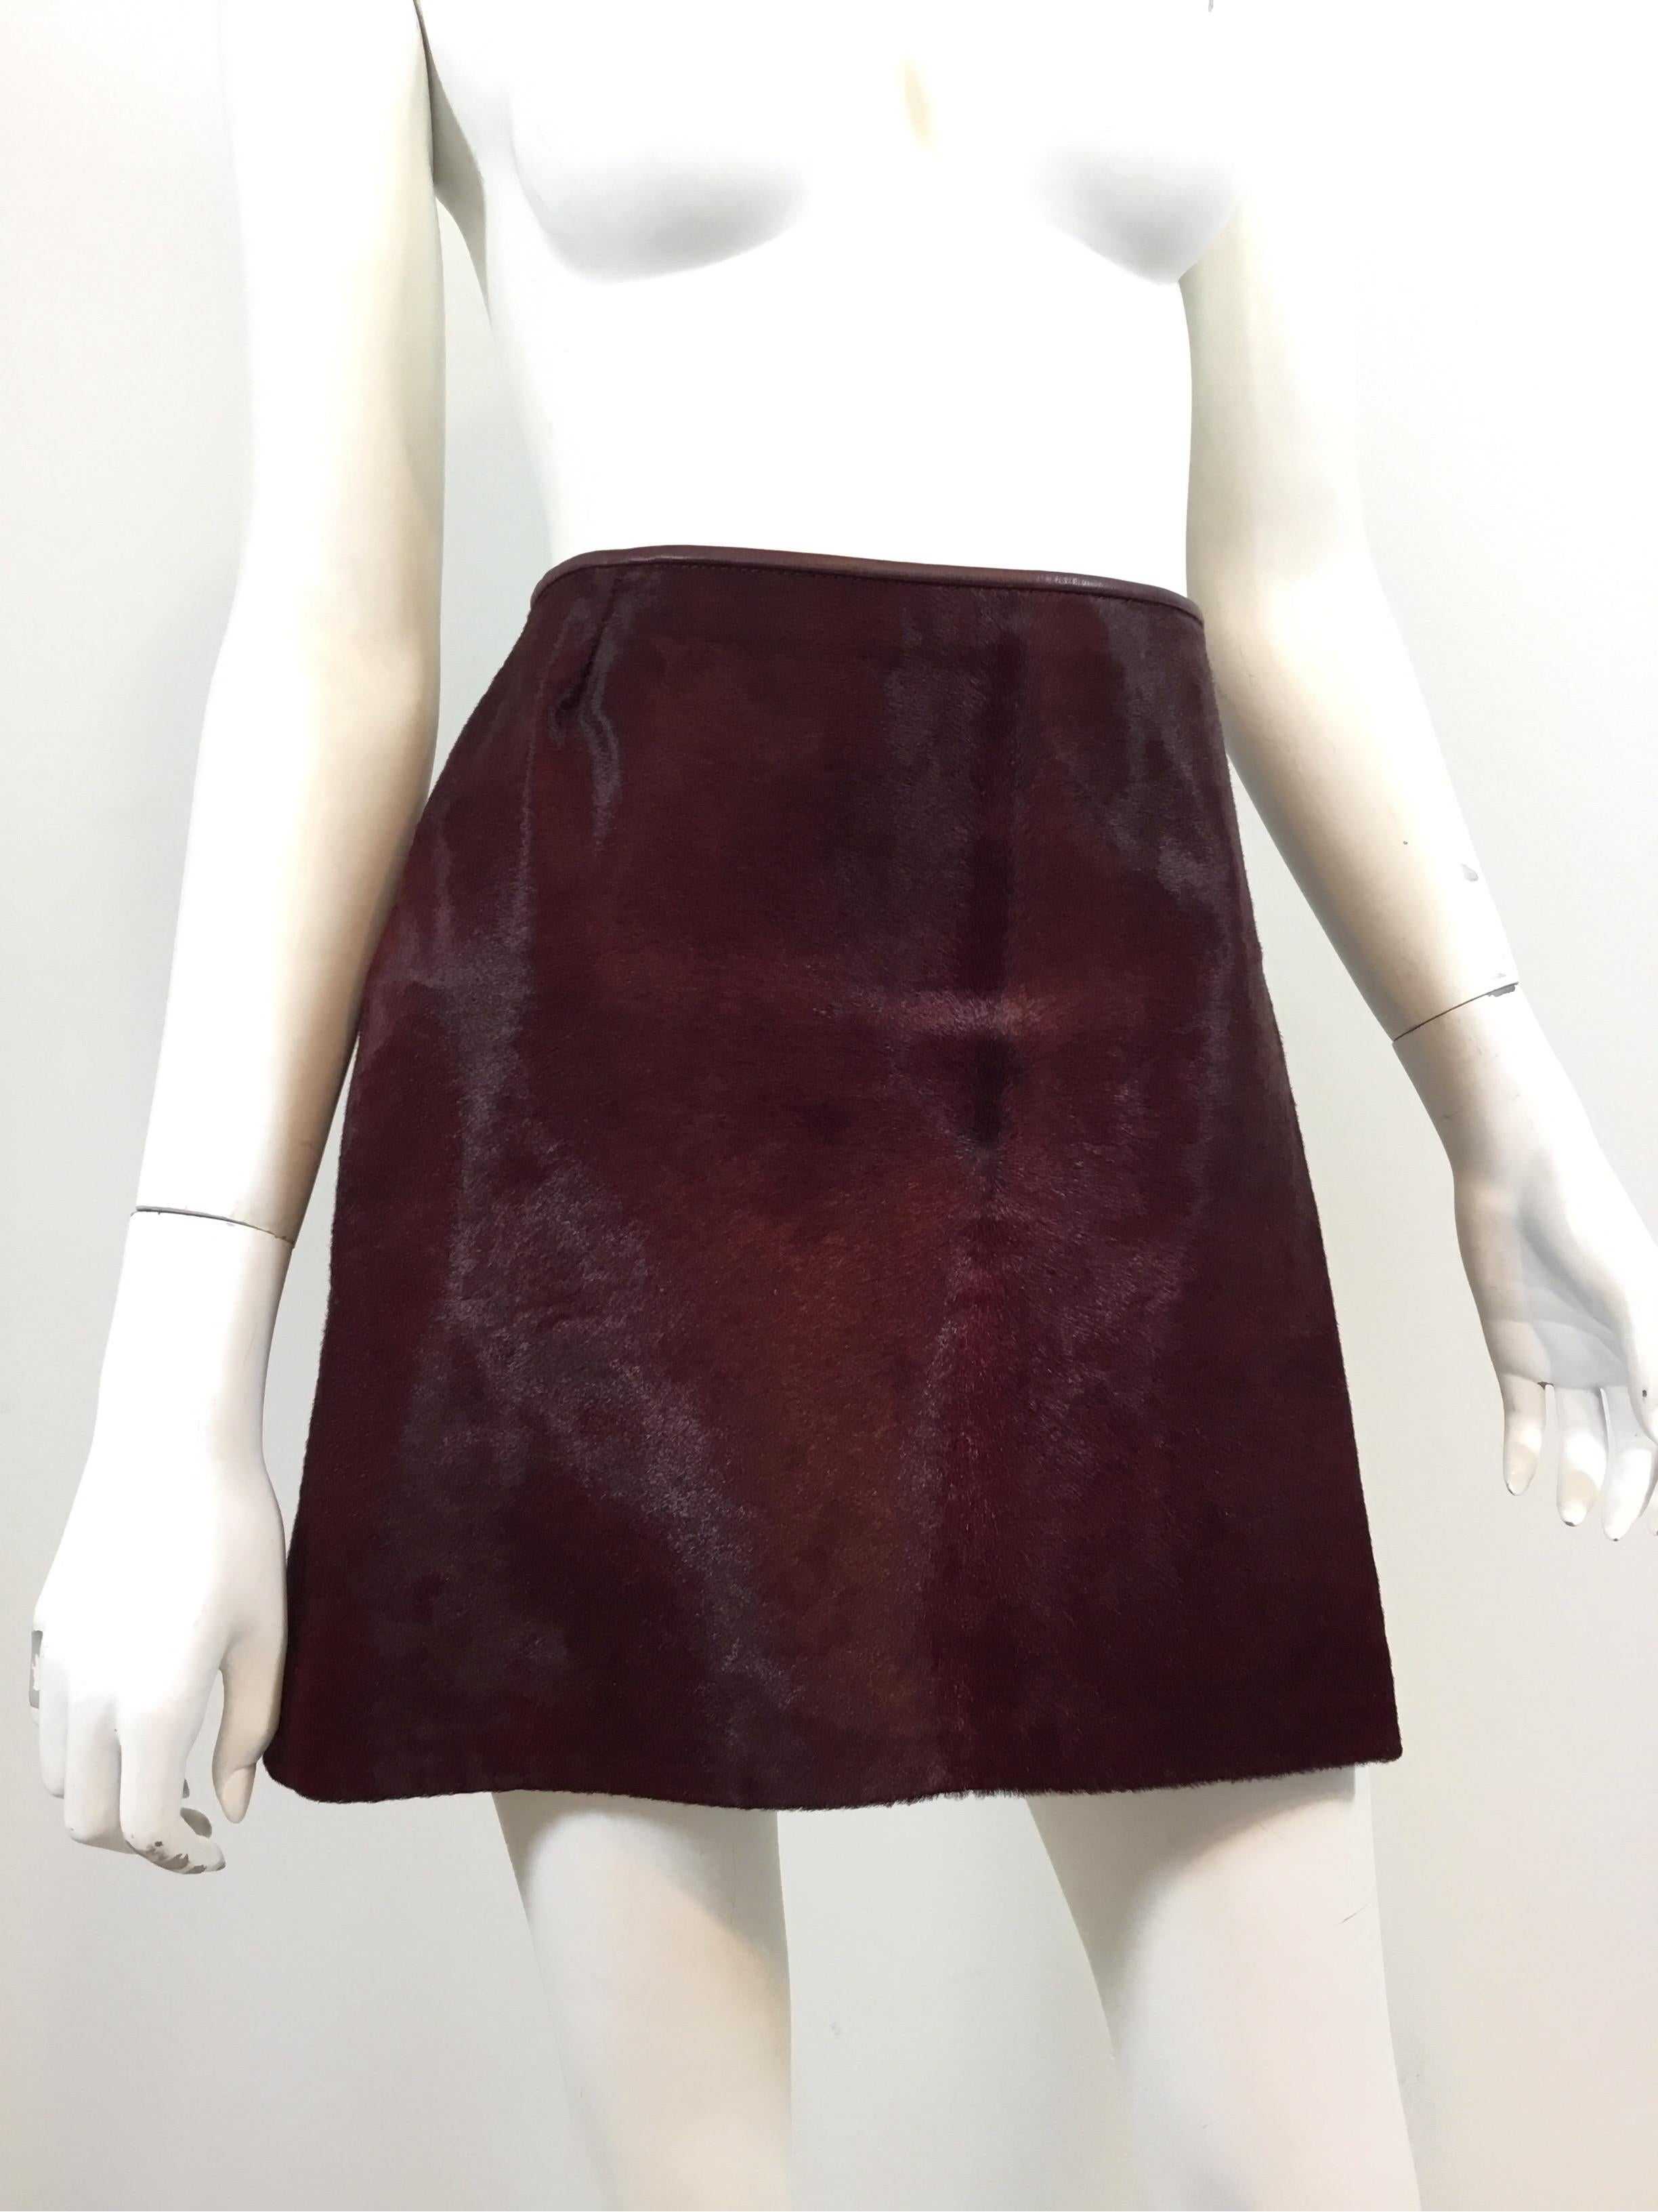 Dolce & Gabbana Vintage mini skirt featured in a maroon/burgundy color with pony fur throughout. Leather trimming along the waist and a back zipper fastening. Fully lined in signature leopard print. Skirt was made in Italy and is labeled a size 40.